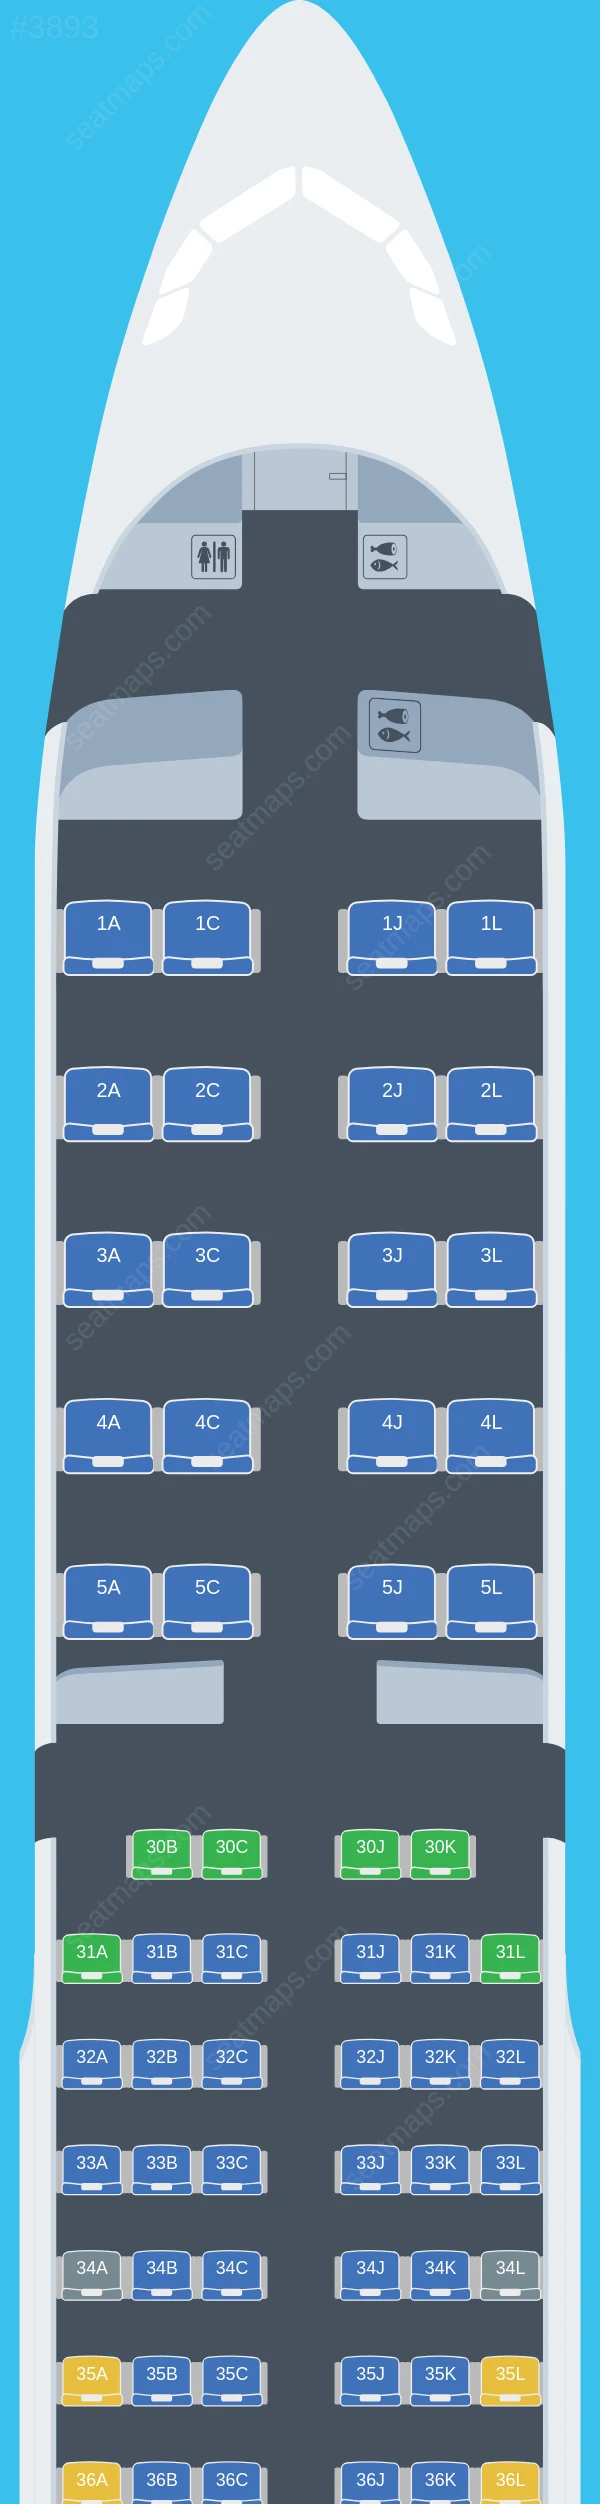 Saudia Airbus A321-200 seatmap preview